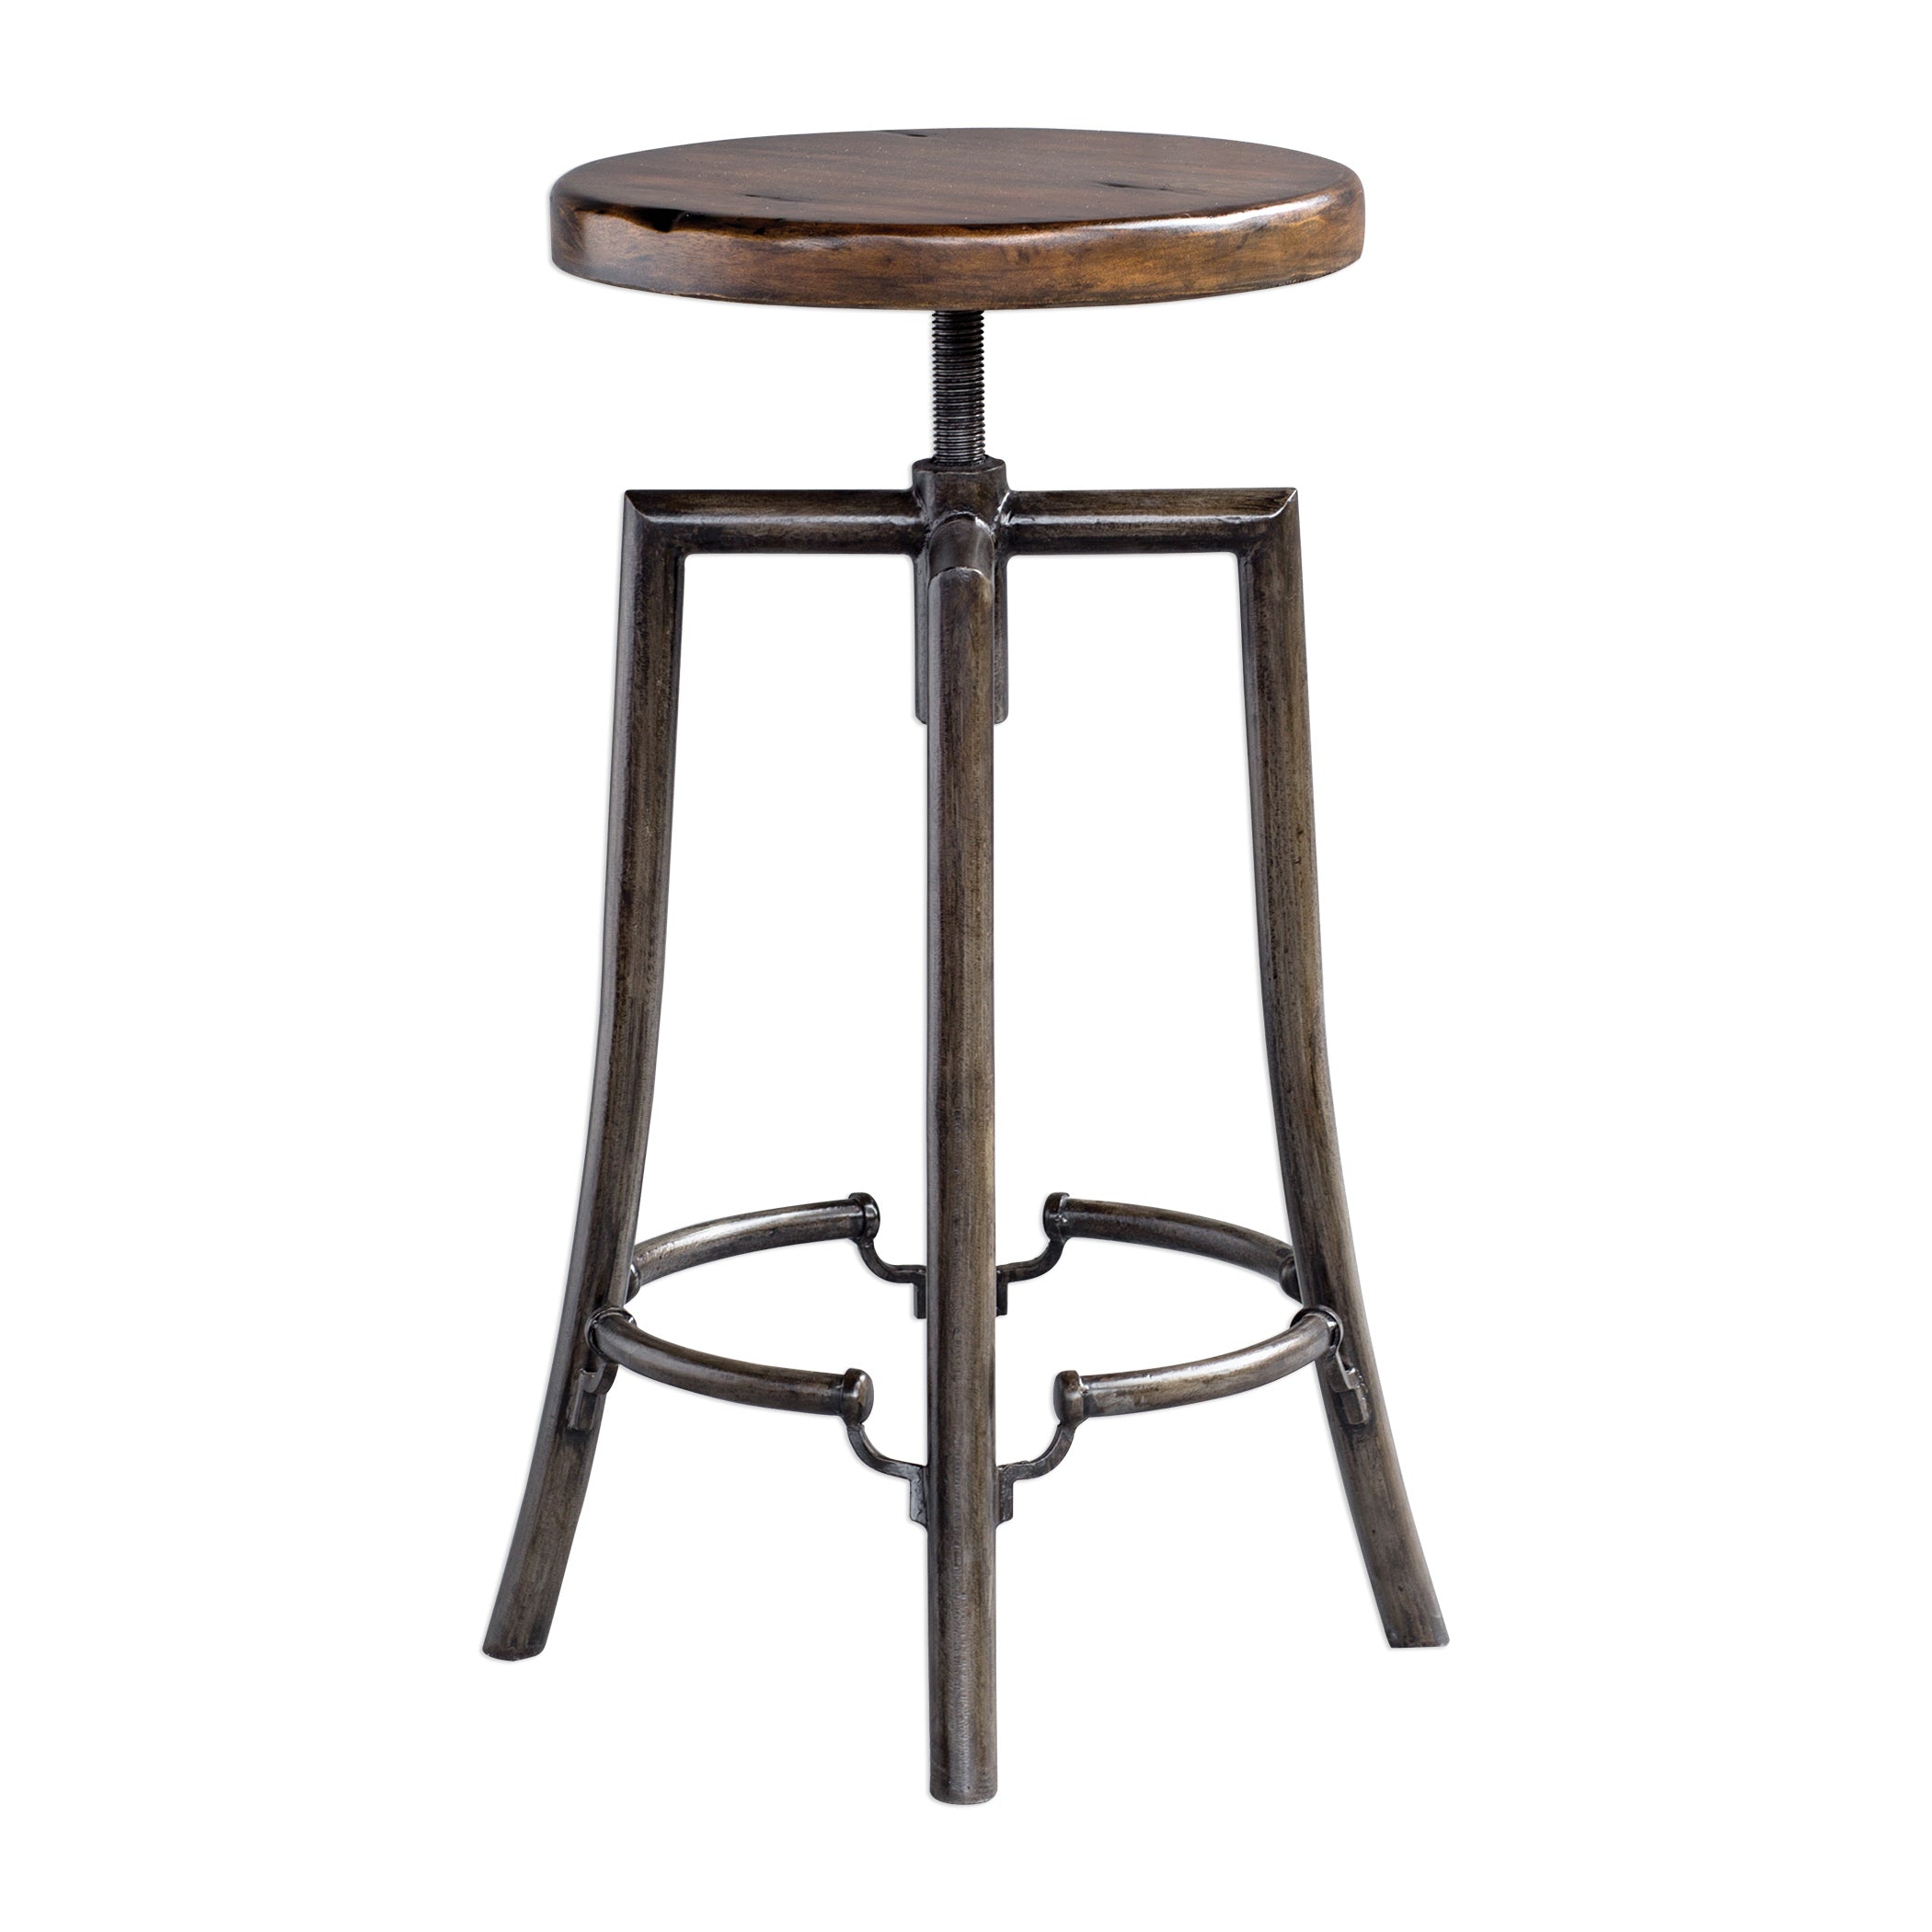 Uttermost Westlyn Bar & Counter Stools Bar & Counter Stools Uttermost   